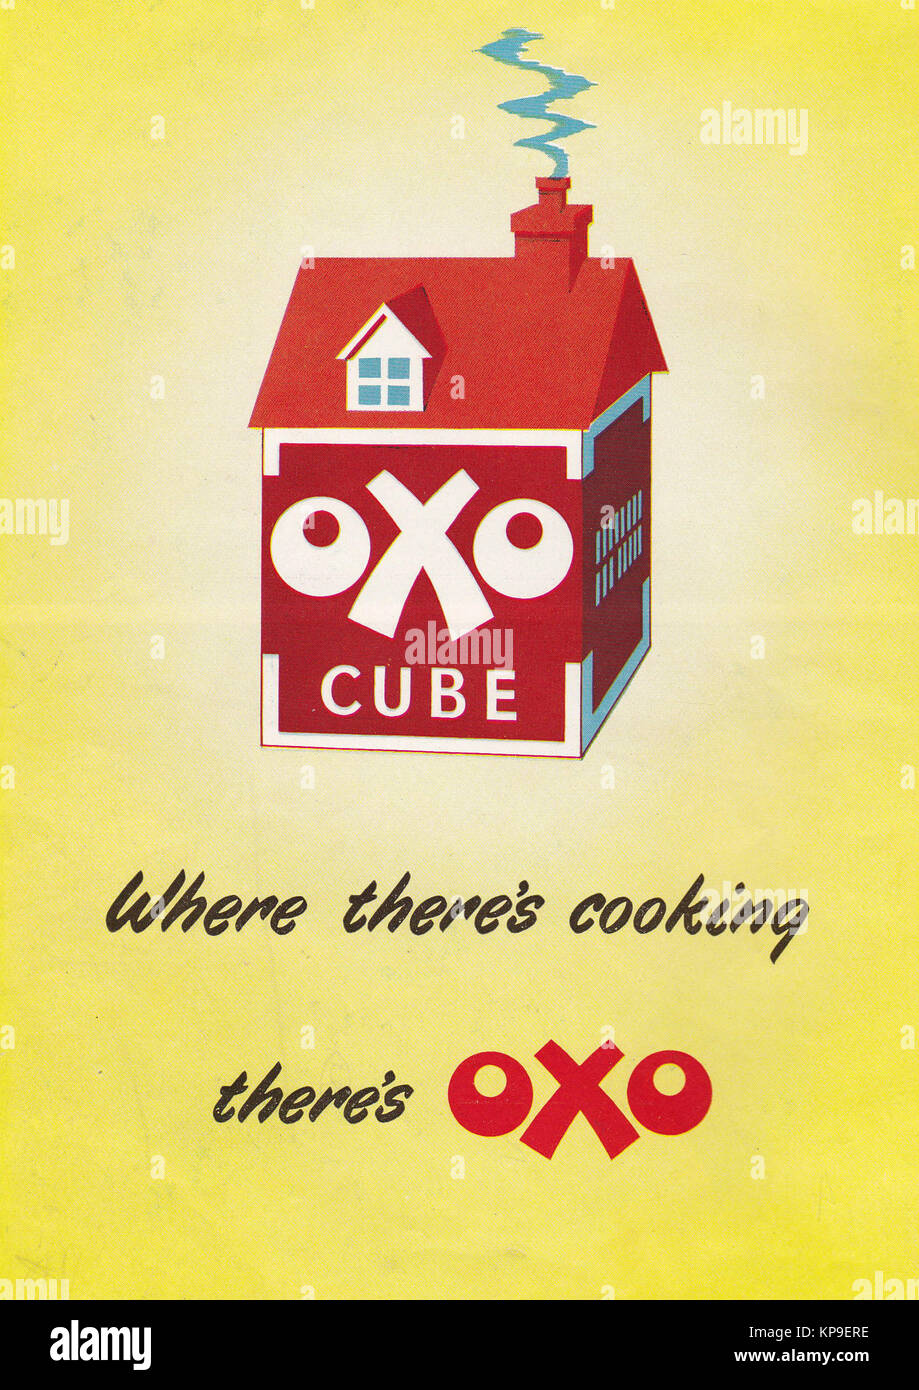 Advert for  Oxo cube Stock Photo